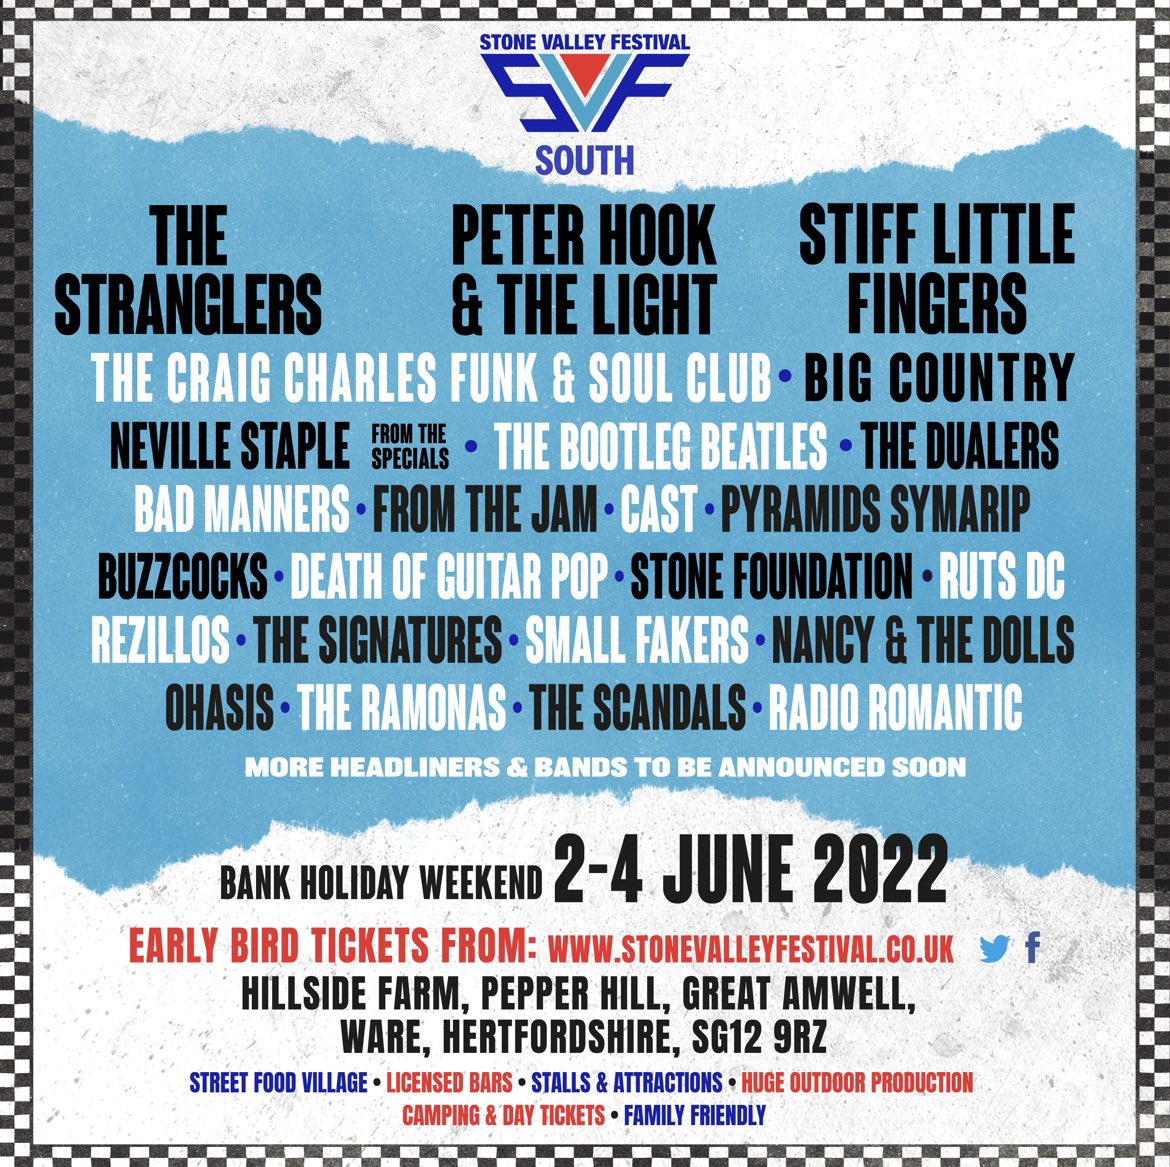 Looking forward to playing at Stone Valley Festival South in early June alongside @StranglersSite & more… @StoneValleyFest @SVFSouth Tickets available now via peterhookandthelight.live